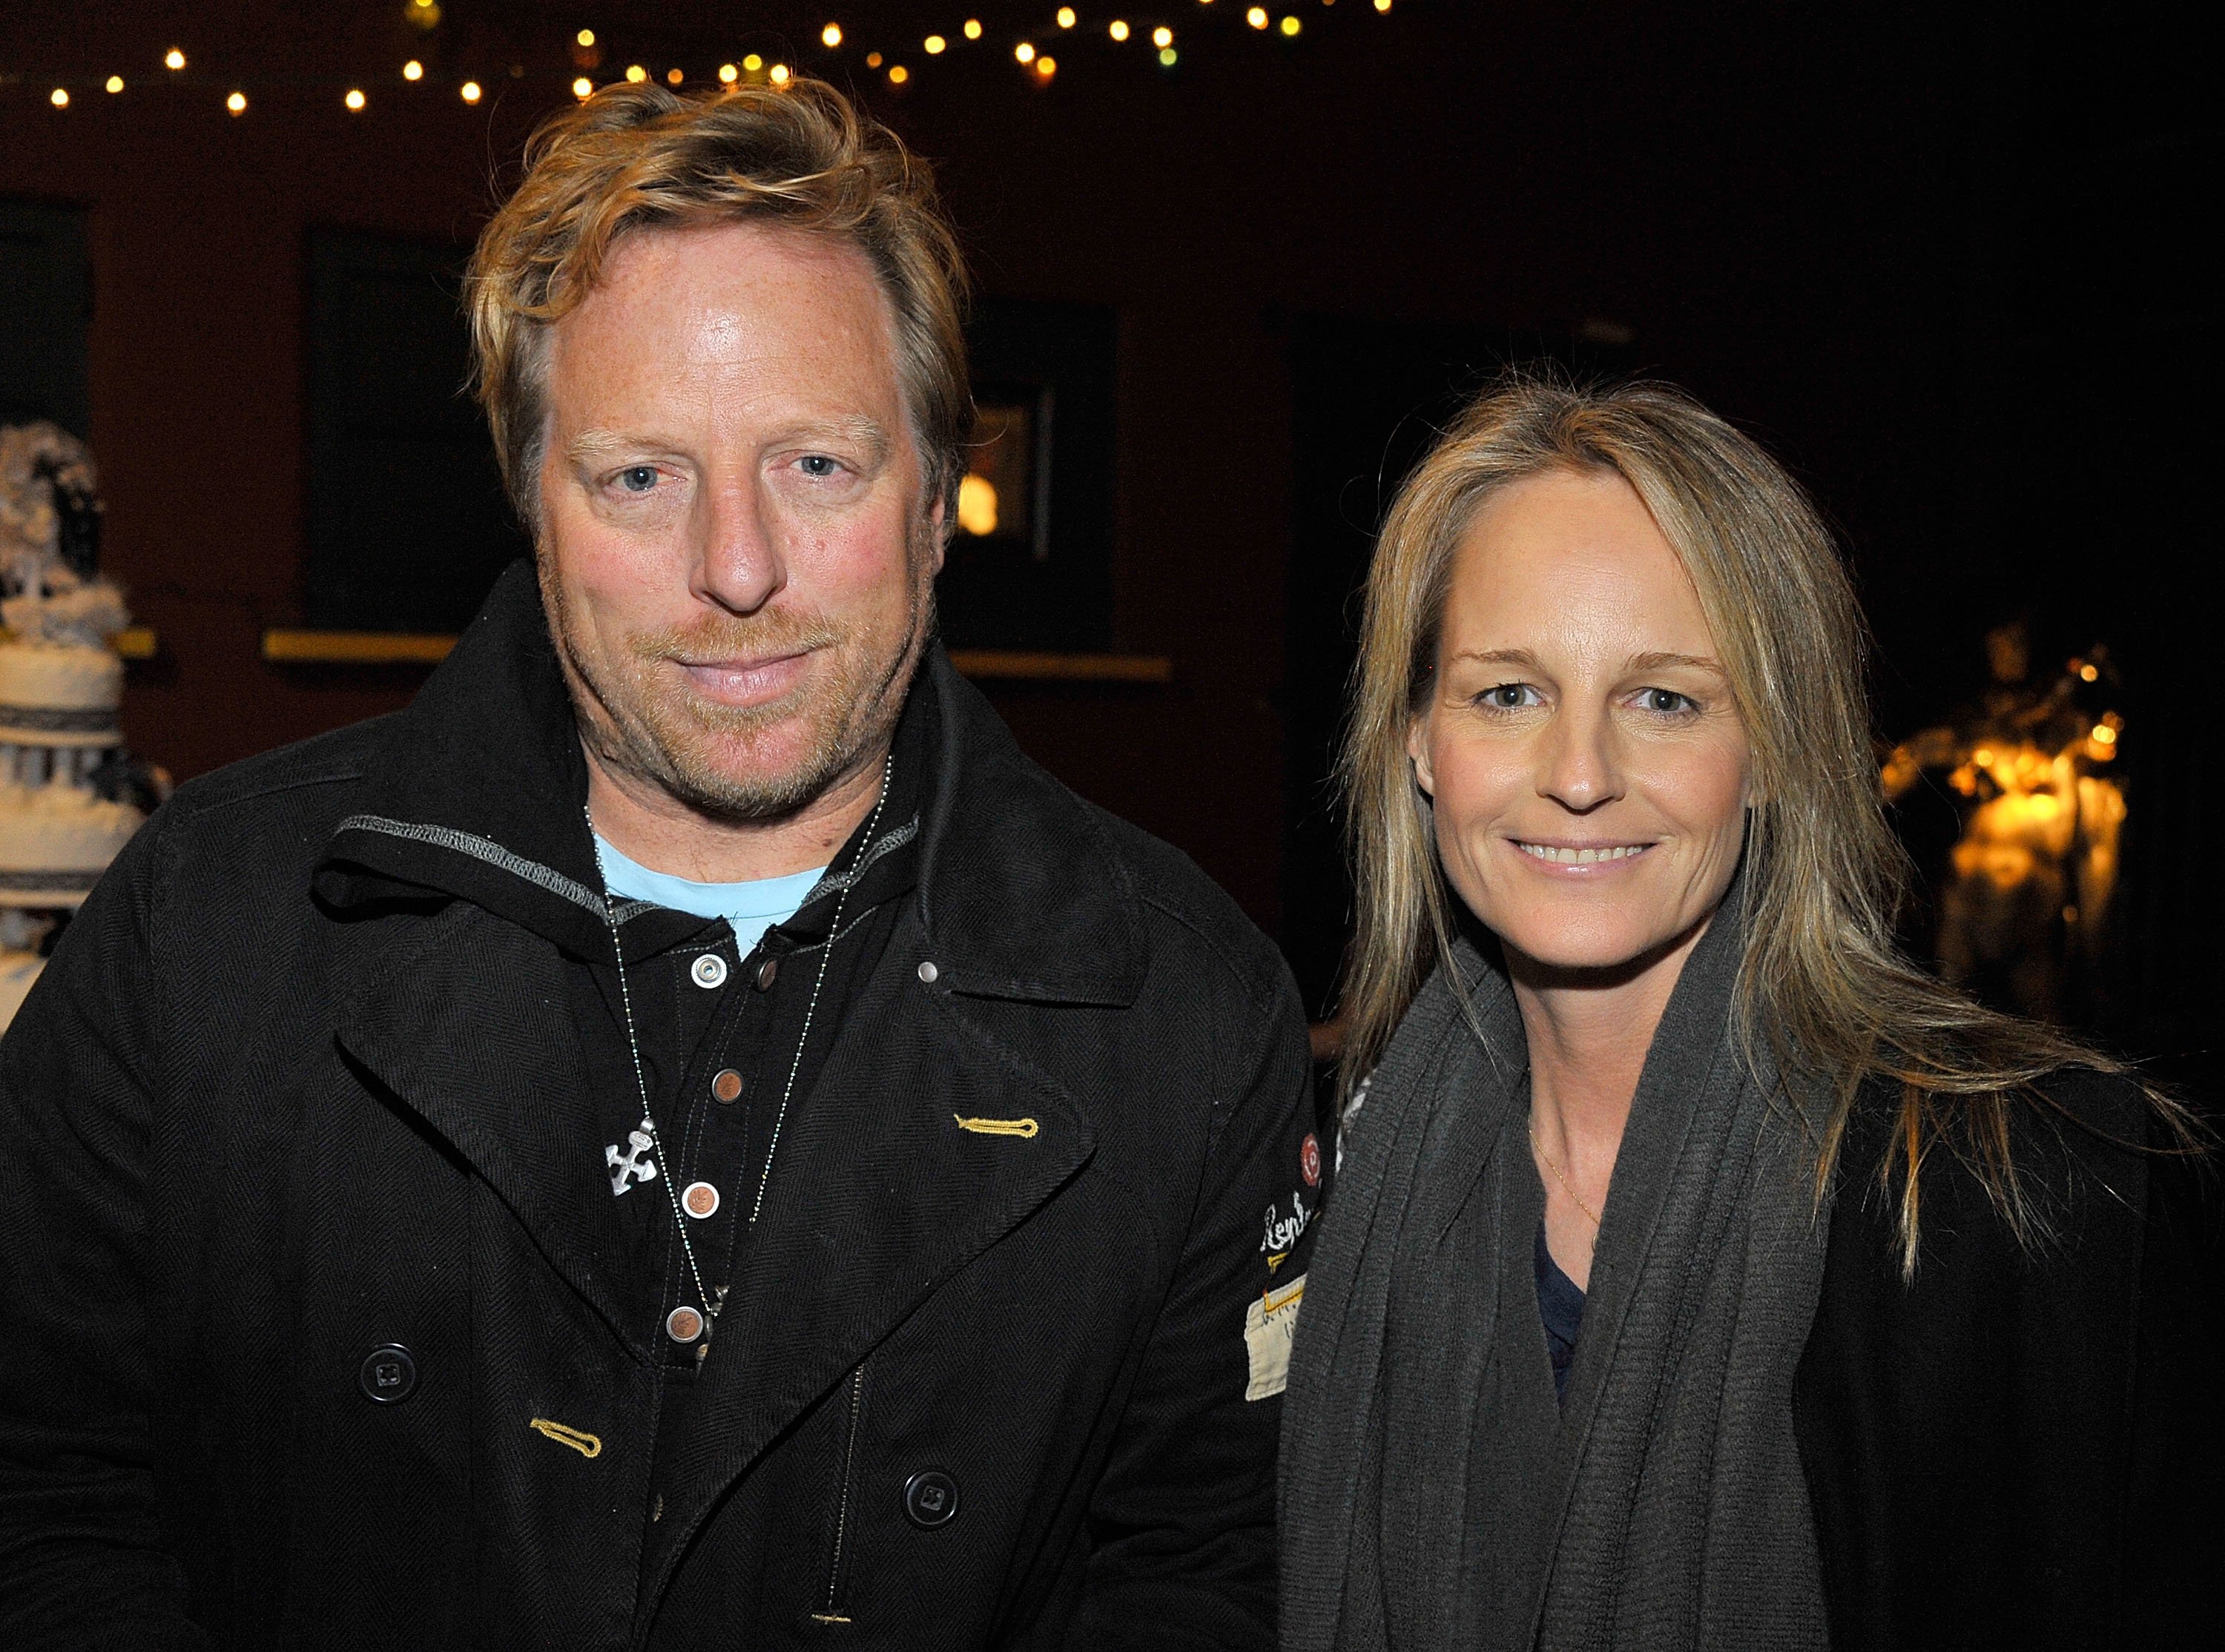 Helen Hunt and Matthew Carnahan at the opening night of "Standing On Ceremony: The Gay Marriage Plays" on December 6, 2010 | Source: Getty Images